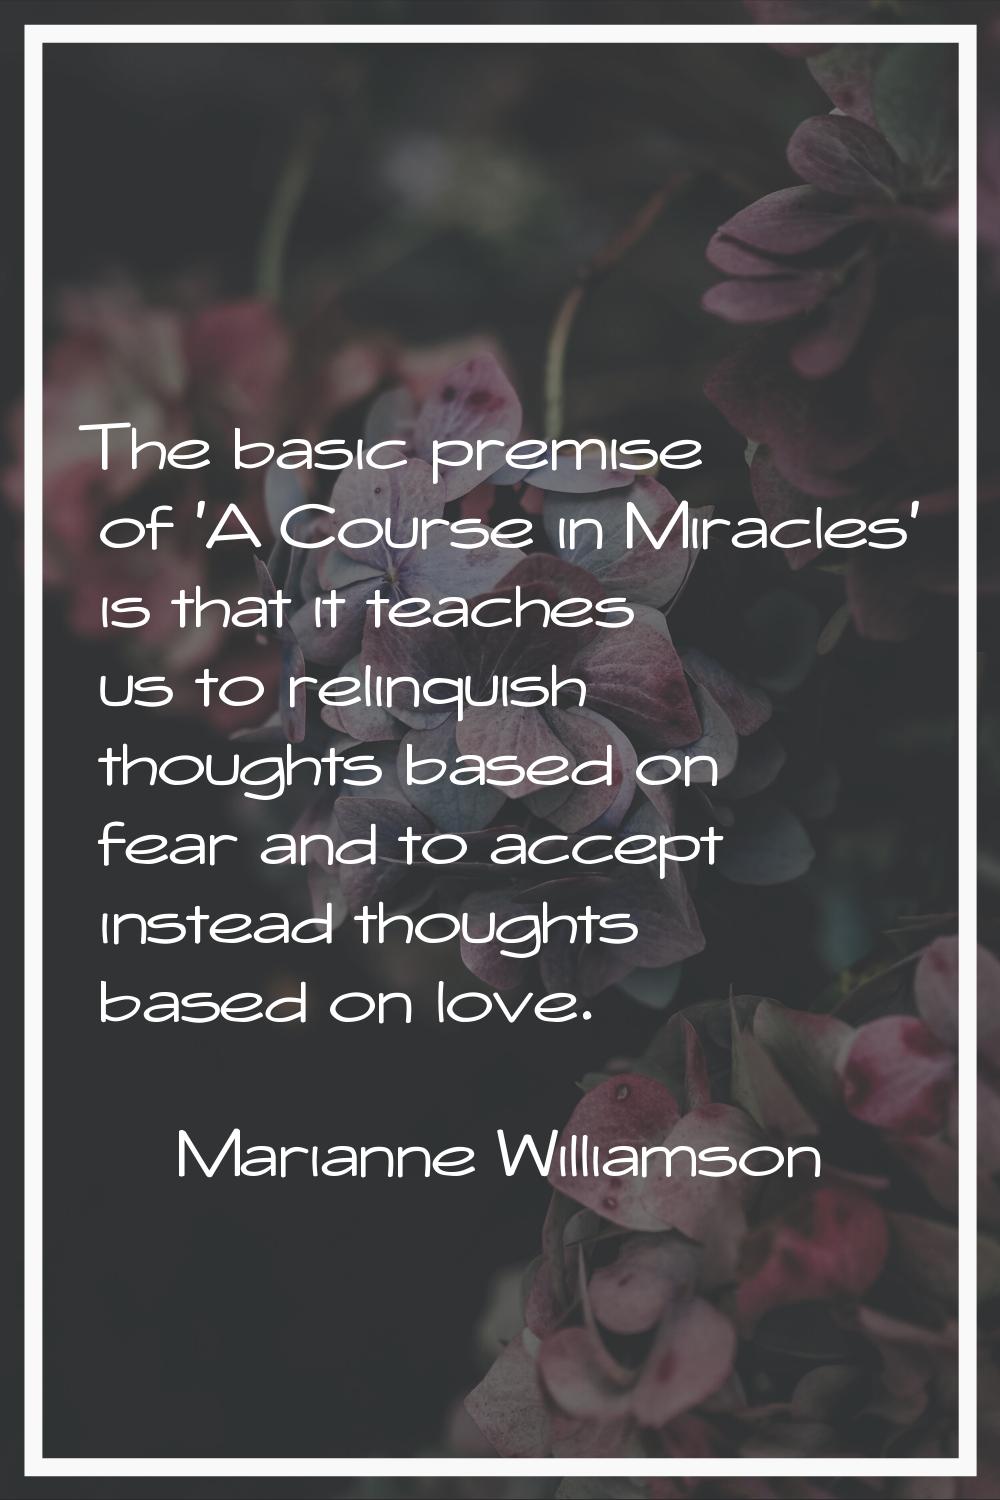 The basic premise of 'A Course in Miracles' is that it teaches us to relinquish thoughts based on f